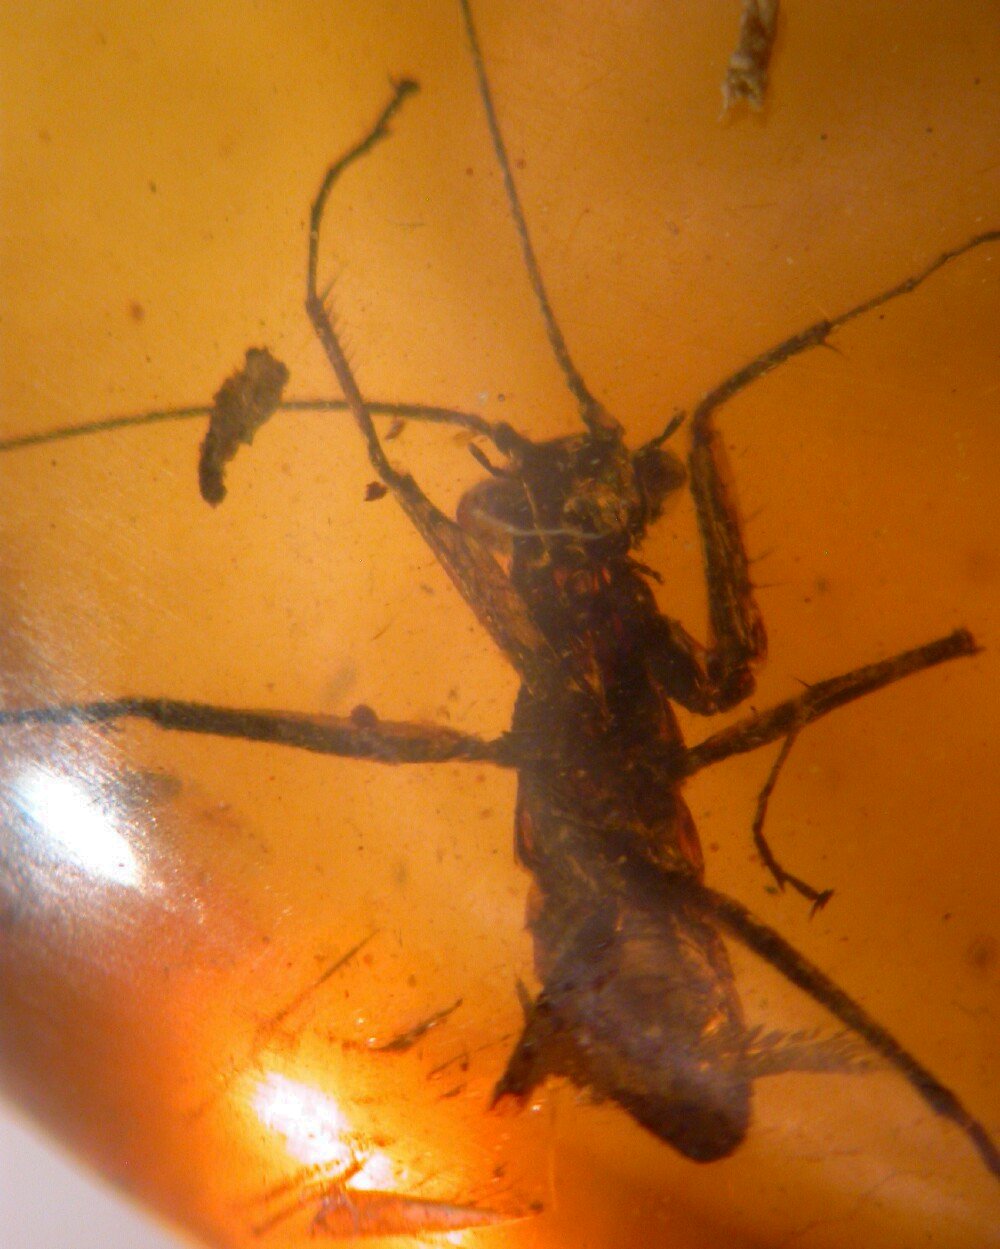 Preying Mantis in Cretaceous Fossil Amber